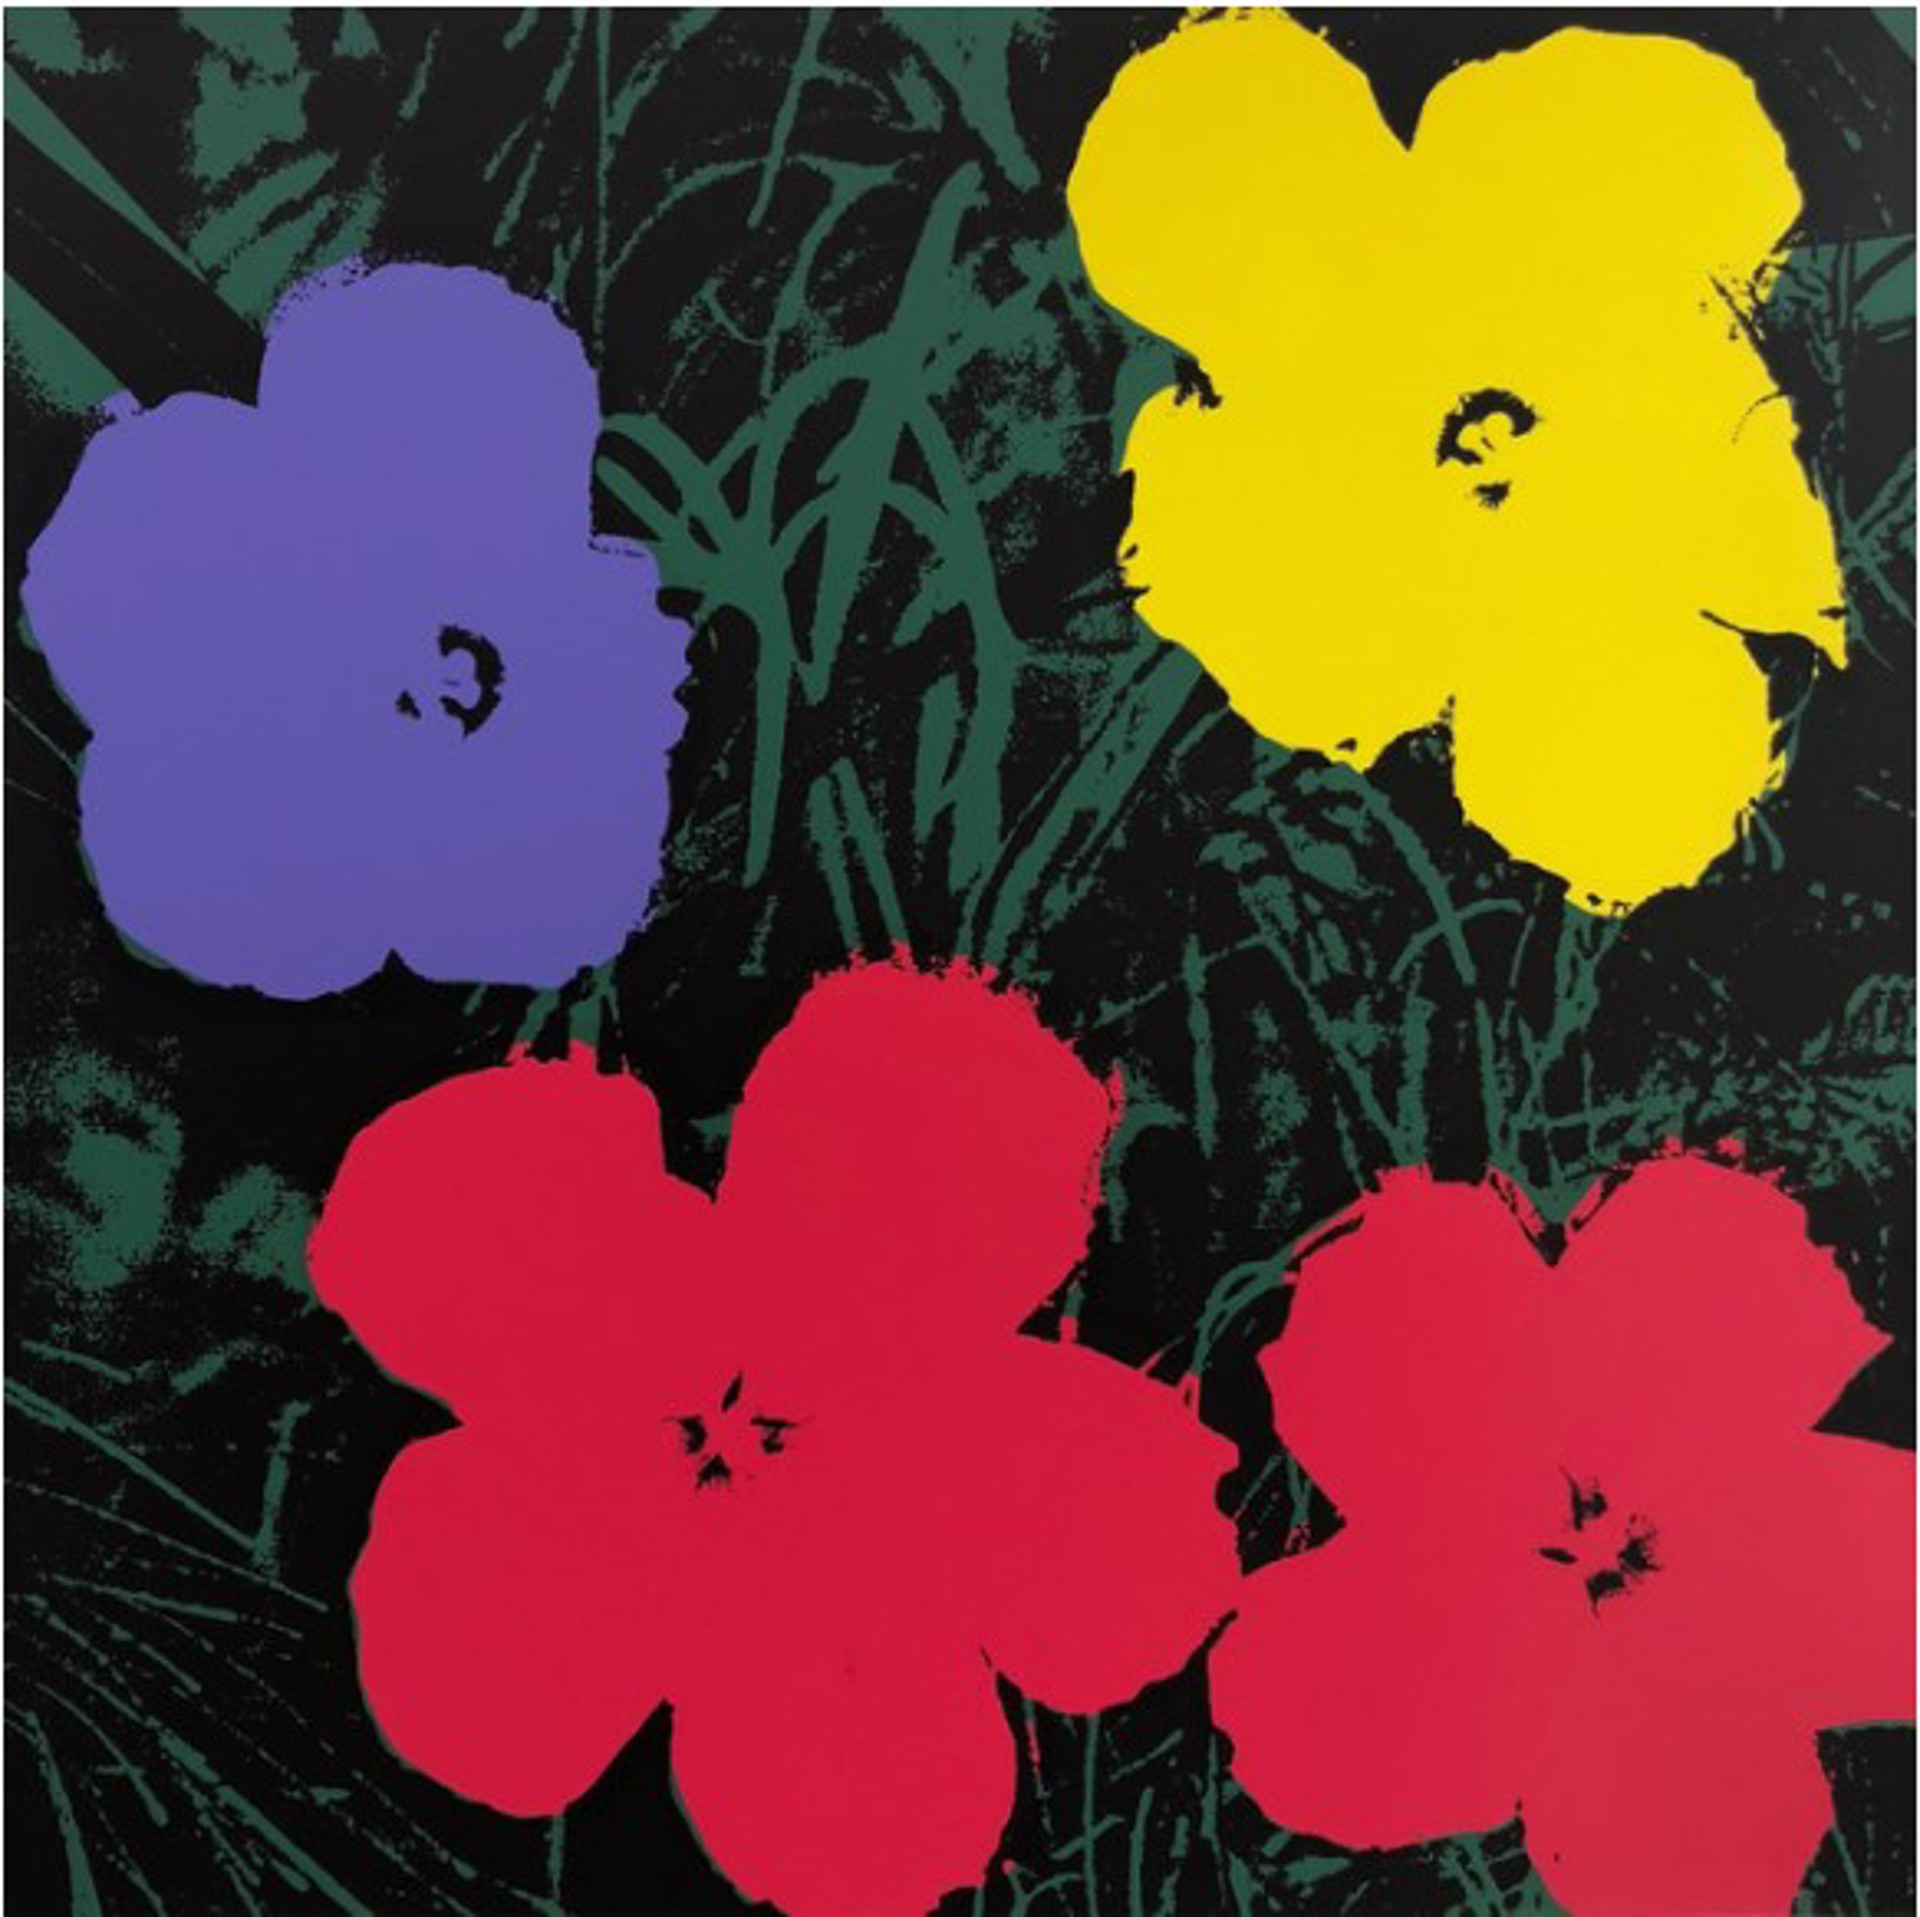 Flowers 11.73 From the Sunday B. Morning Edition by Andy Warhol (1928 - 1987)